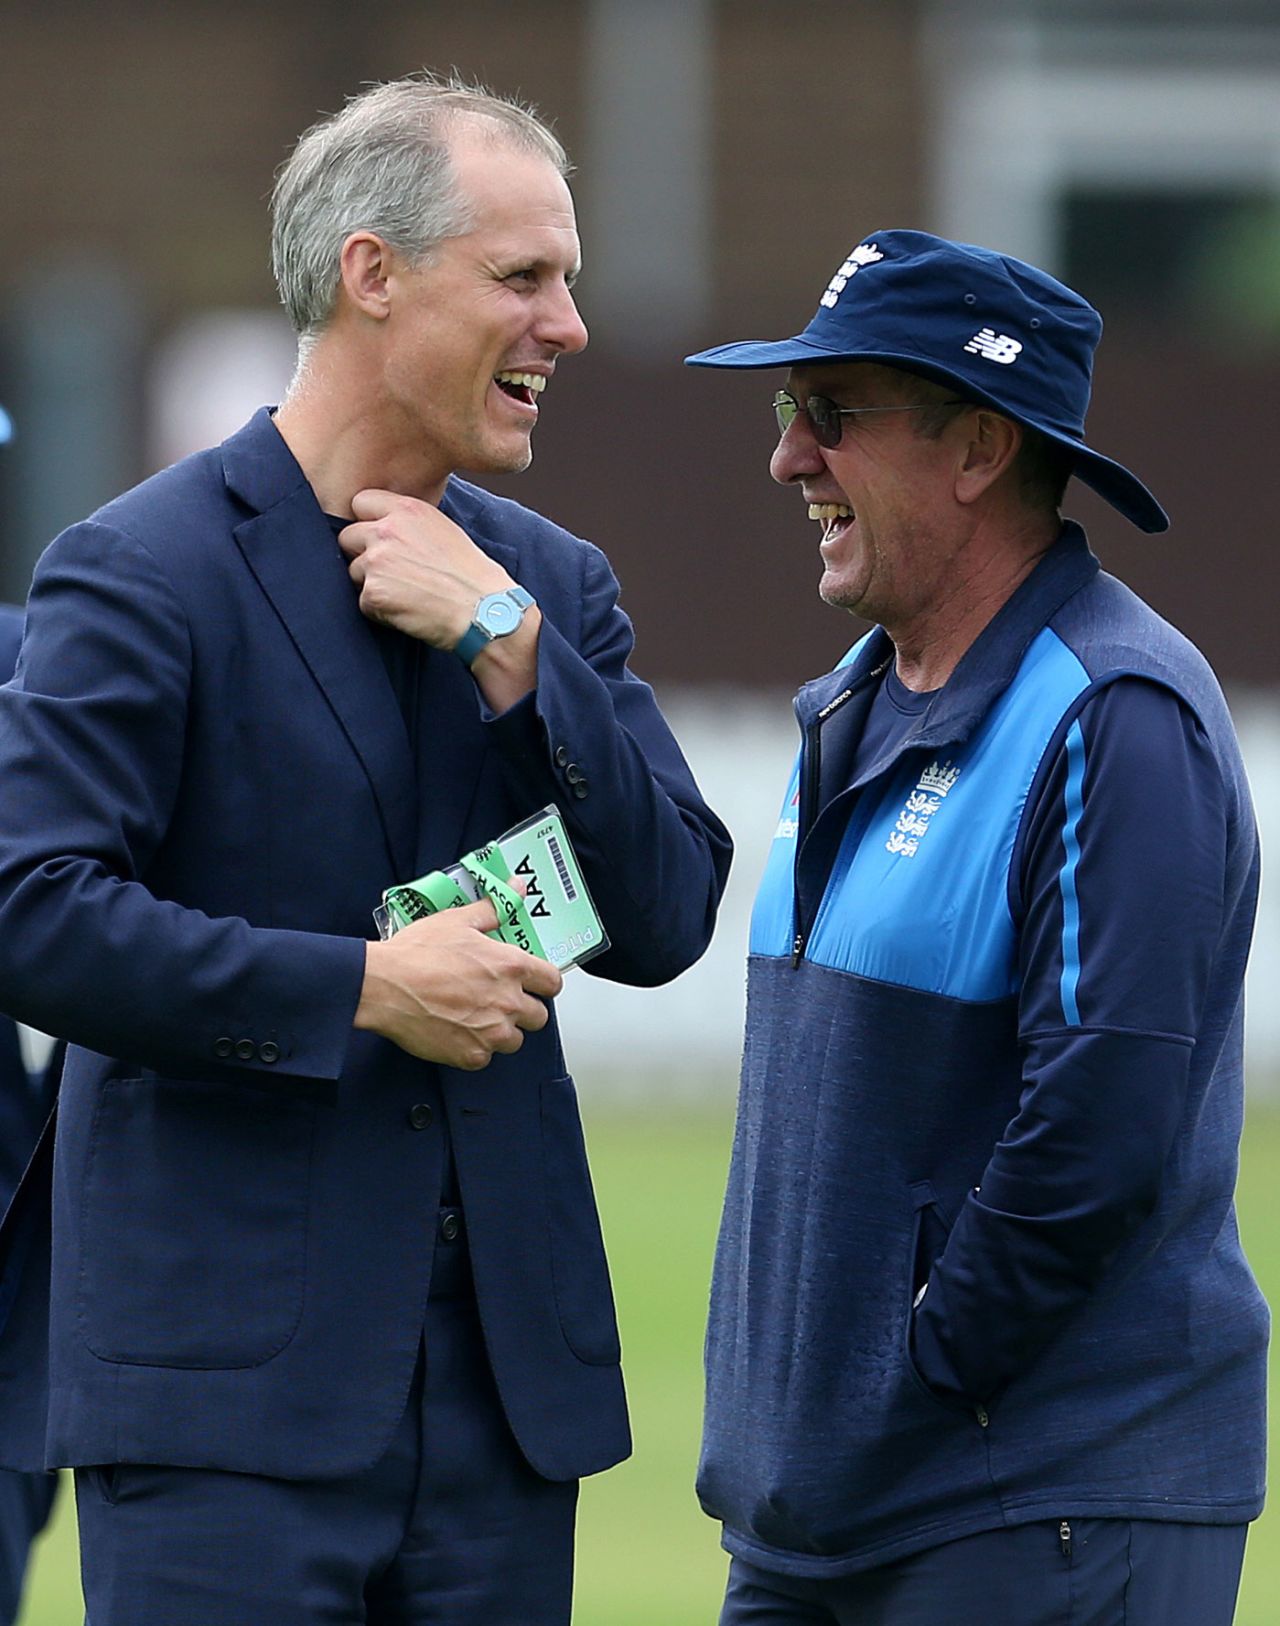 Serious business: Ed Smith and Trevor Bayliss share a laugh ahead of the first Test, Lord's, May 21, 2018